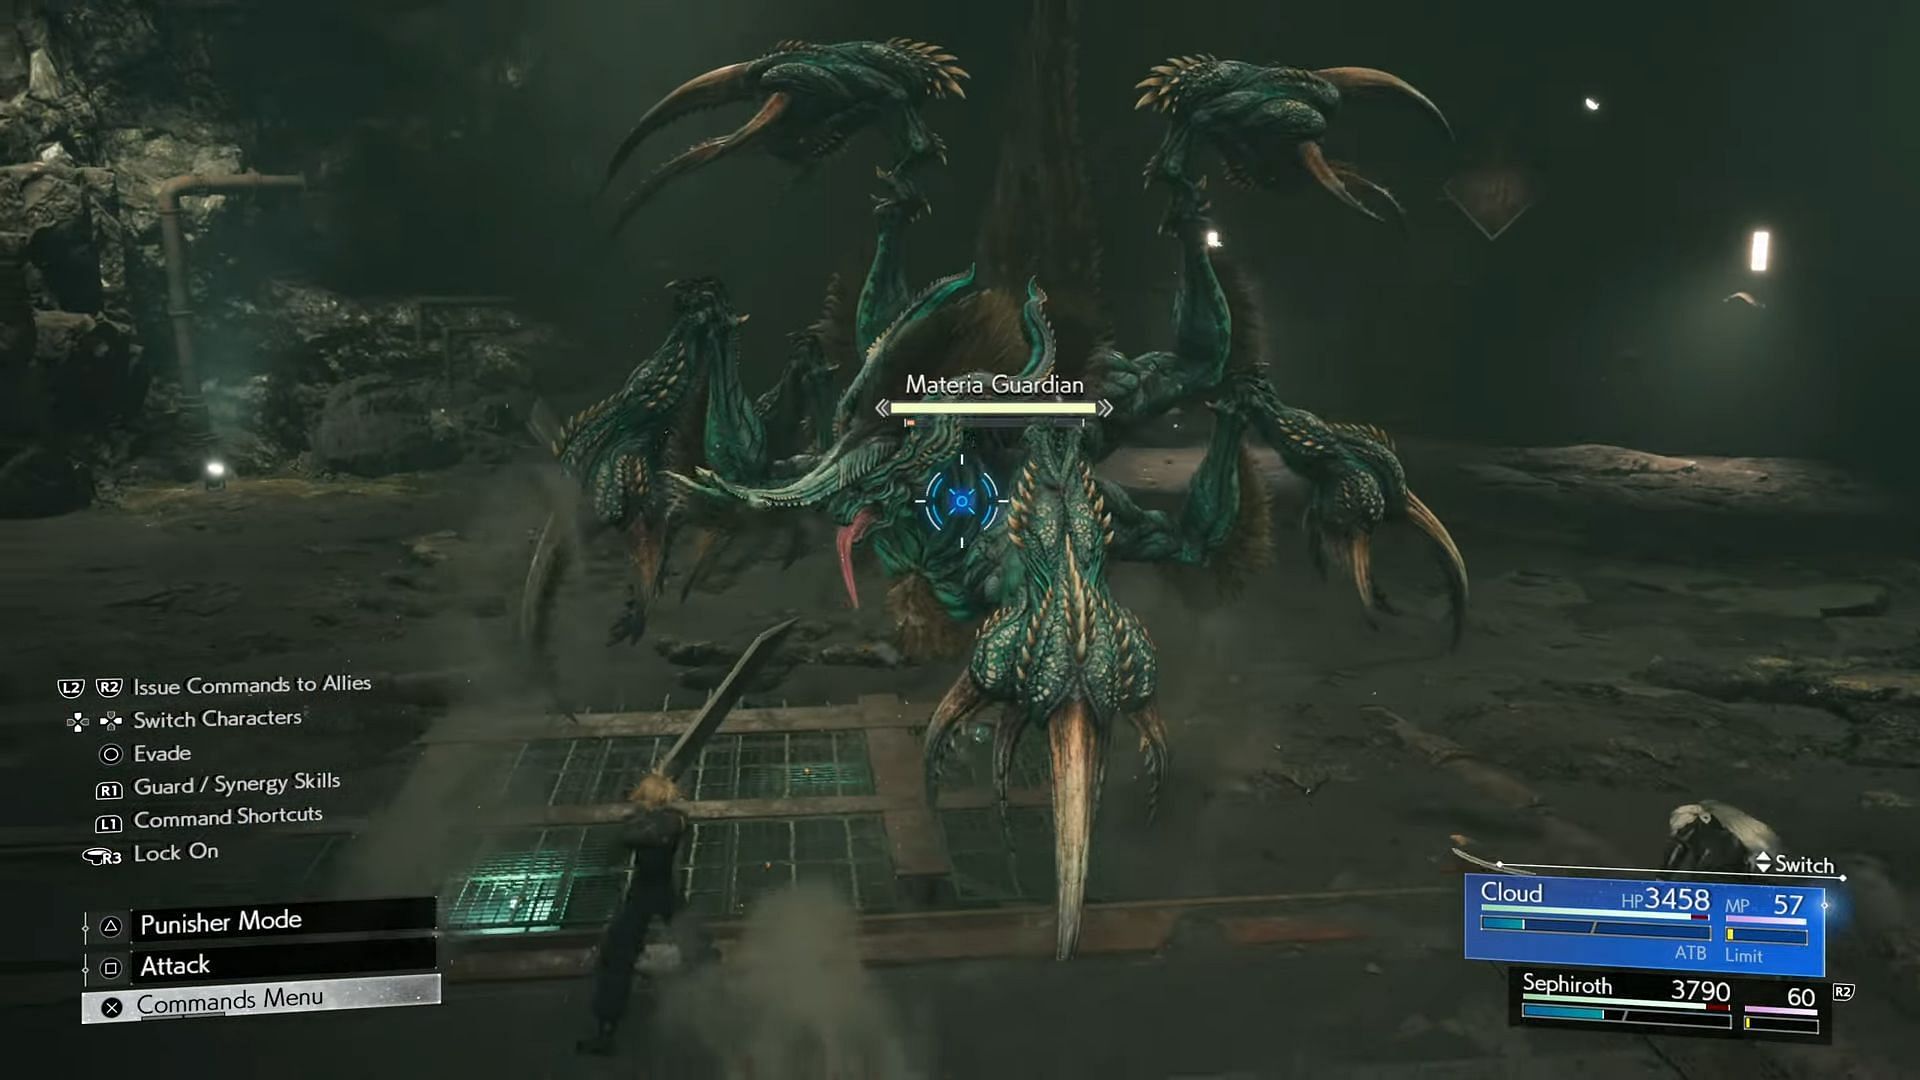 Facing off against the Materia Guardian in Final Fantasy 7 Rebirth (Image via YouTube/Boss Fight Database, Square Enix)